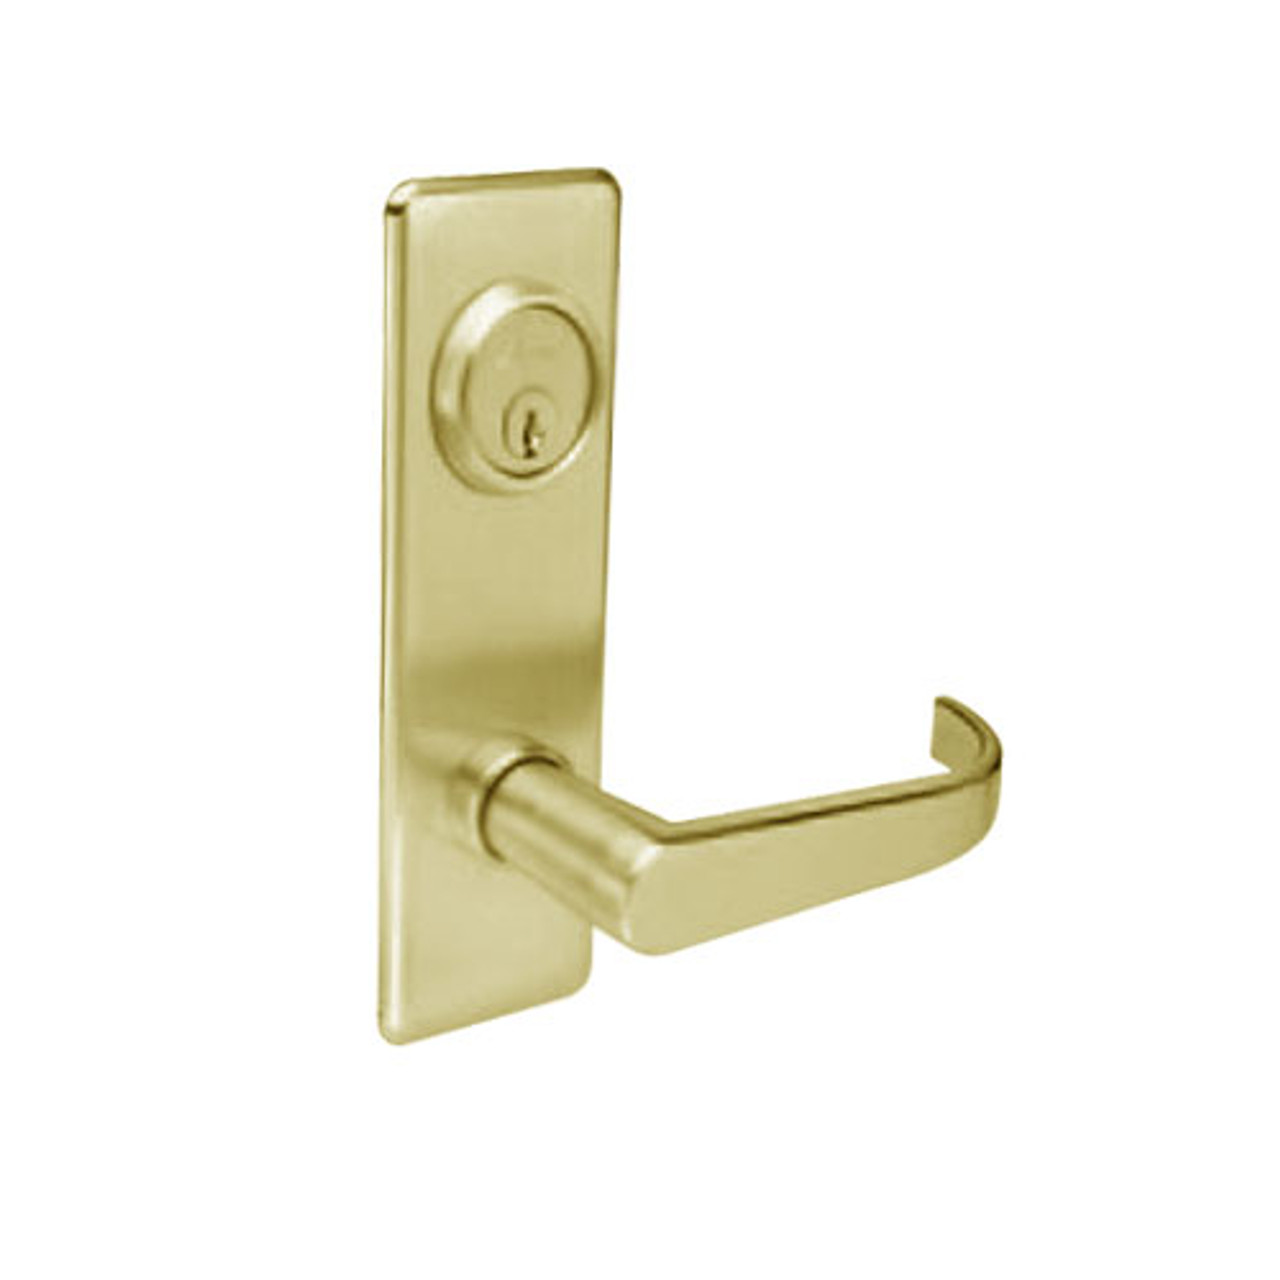 BM02-BRG-04 Arrow Mortise Lock BM Series Privacy Lever with Broadway Design and G Escutcheon in Satin Brass